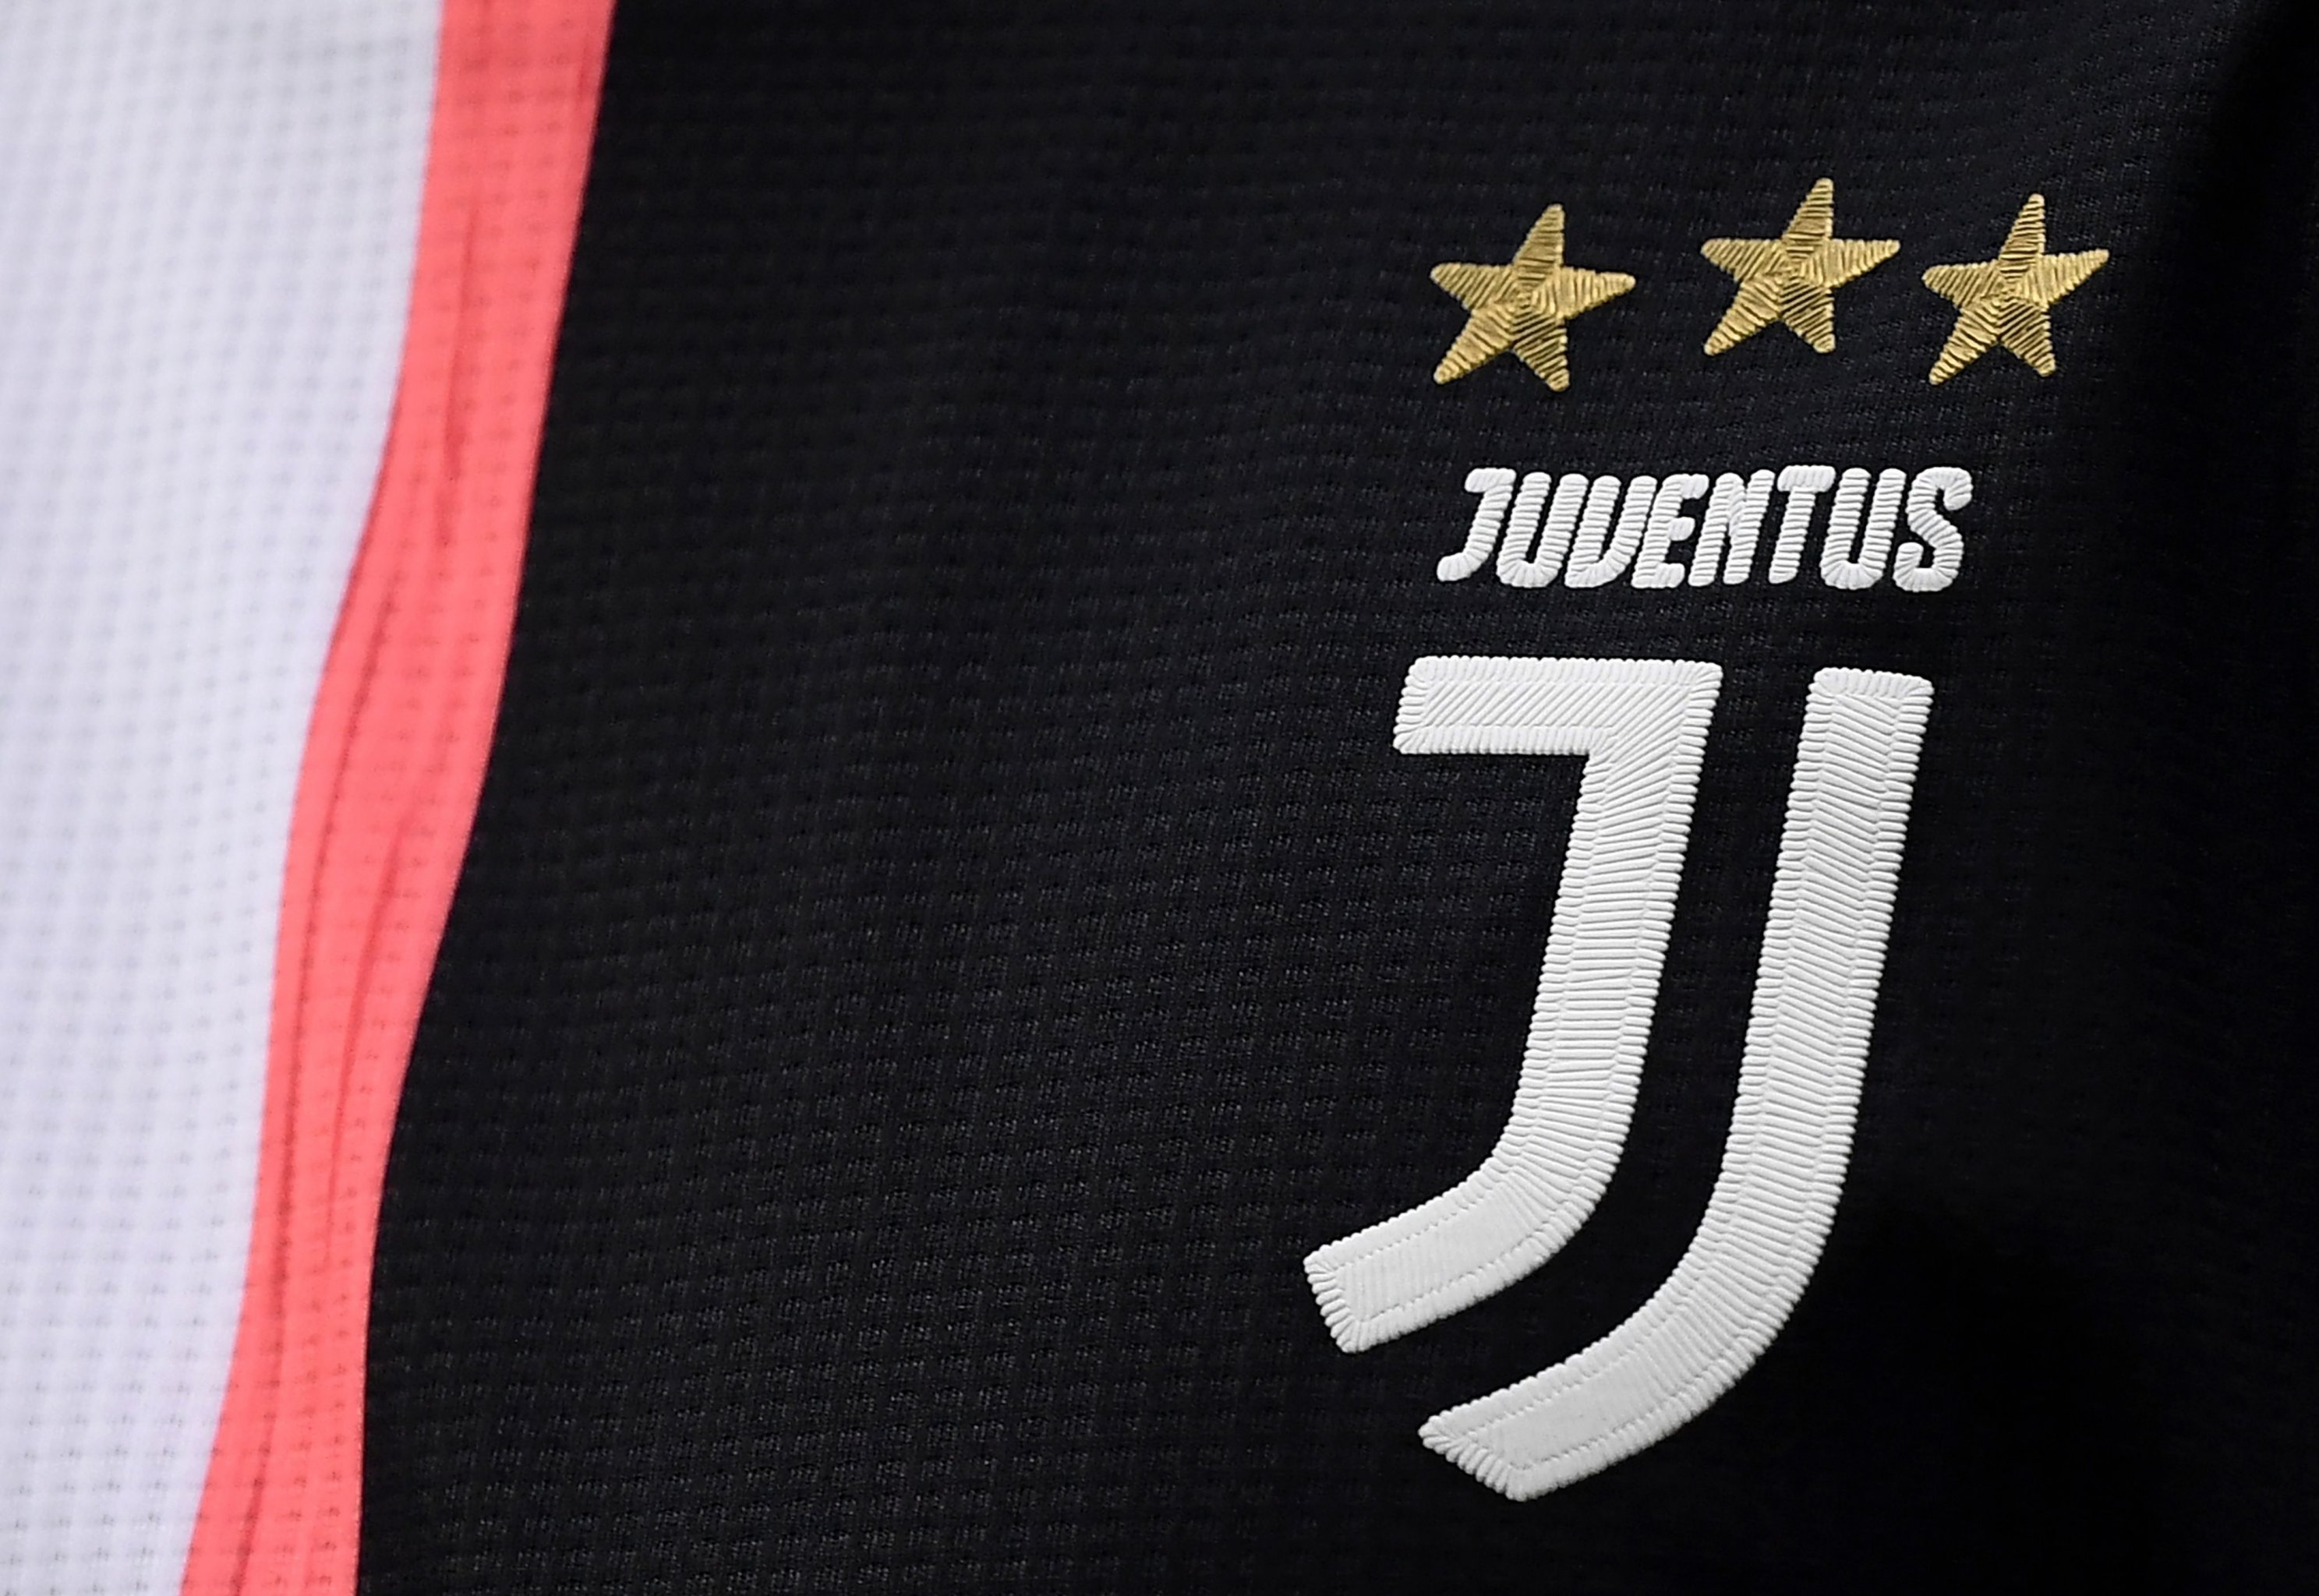 rebranding juventus how a new logo and ronaldo have changed everything bleacher report latest news videos and highlights rebranding juventus how a new logo and